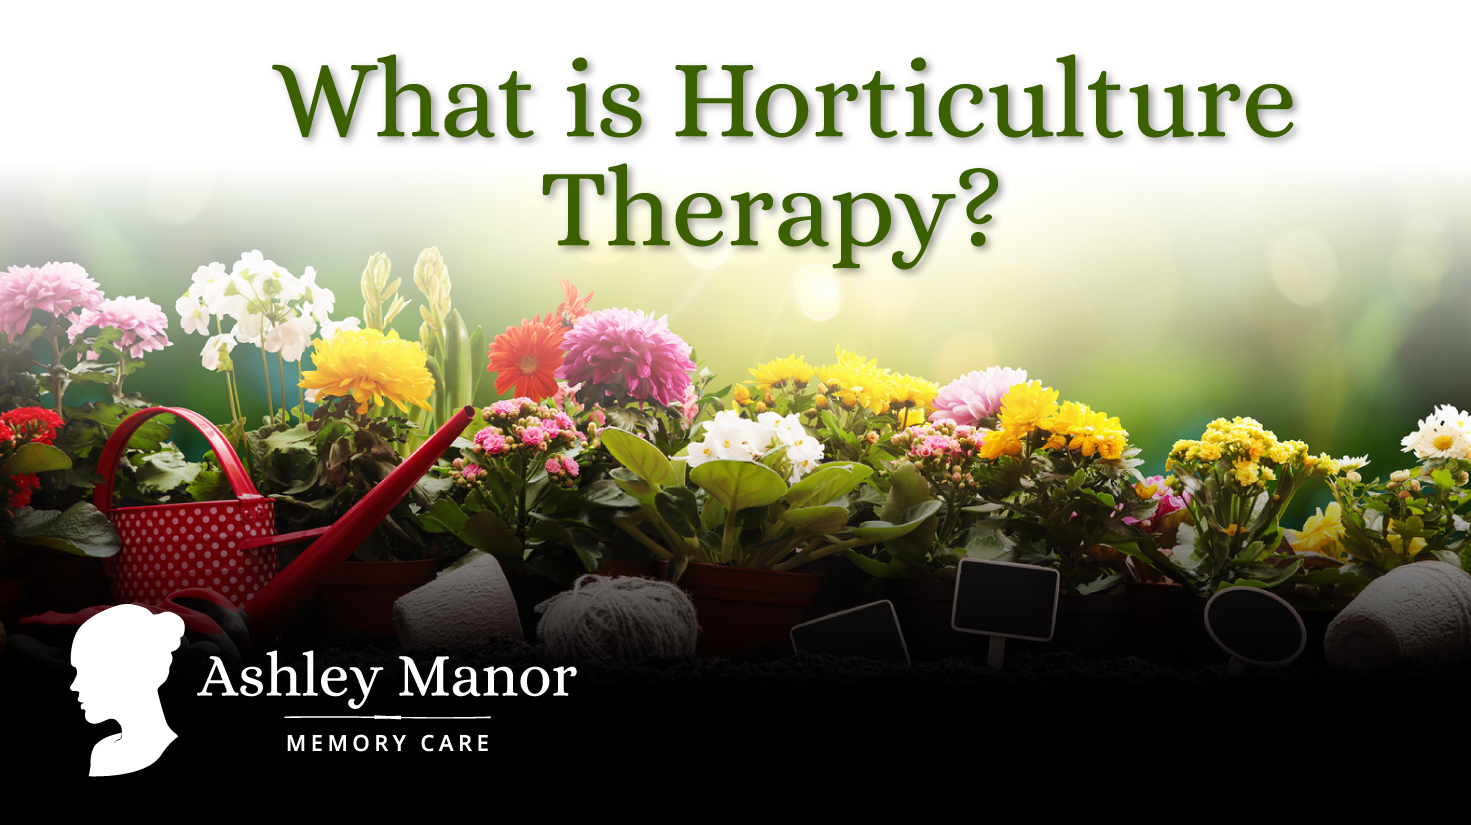 horticultural therapy business plan